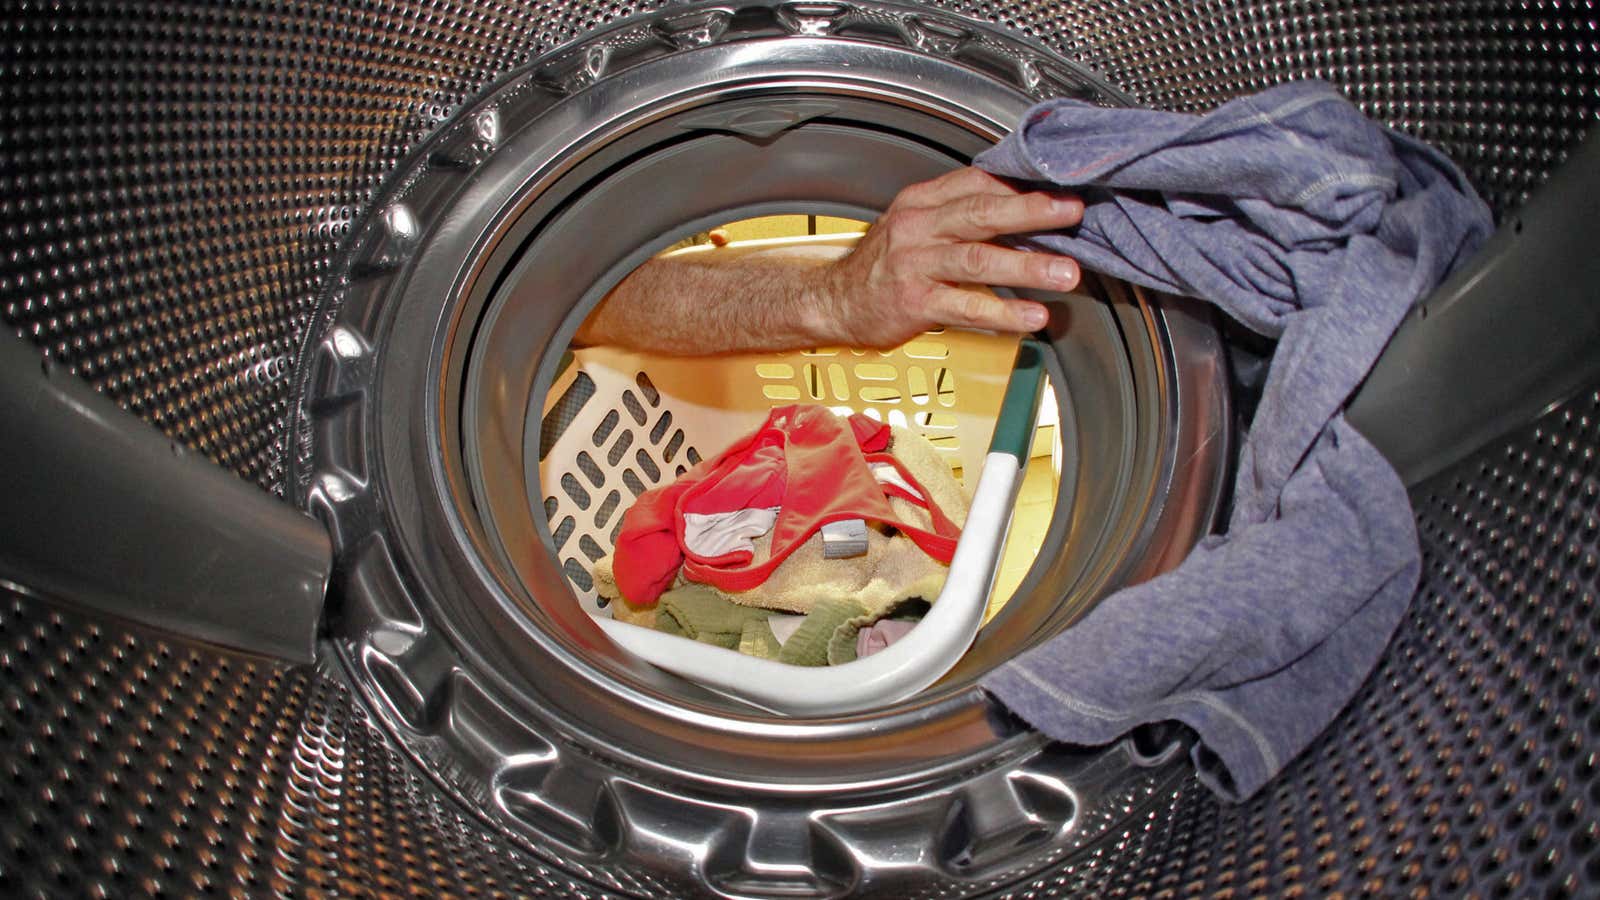 The economic data cycle continues to spin. And yes, washing machines are durable goods.